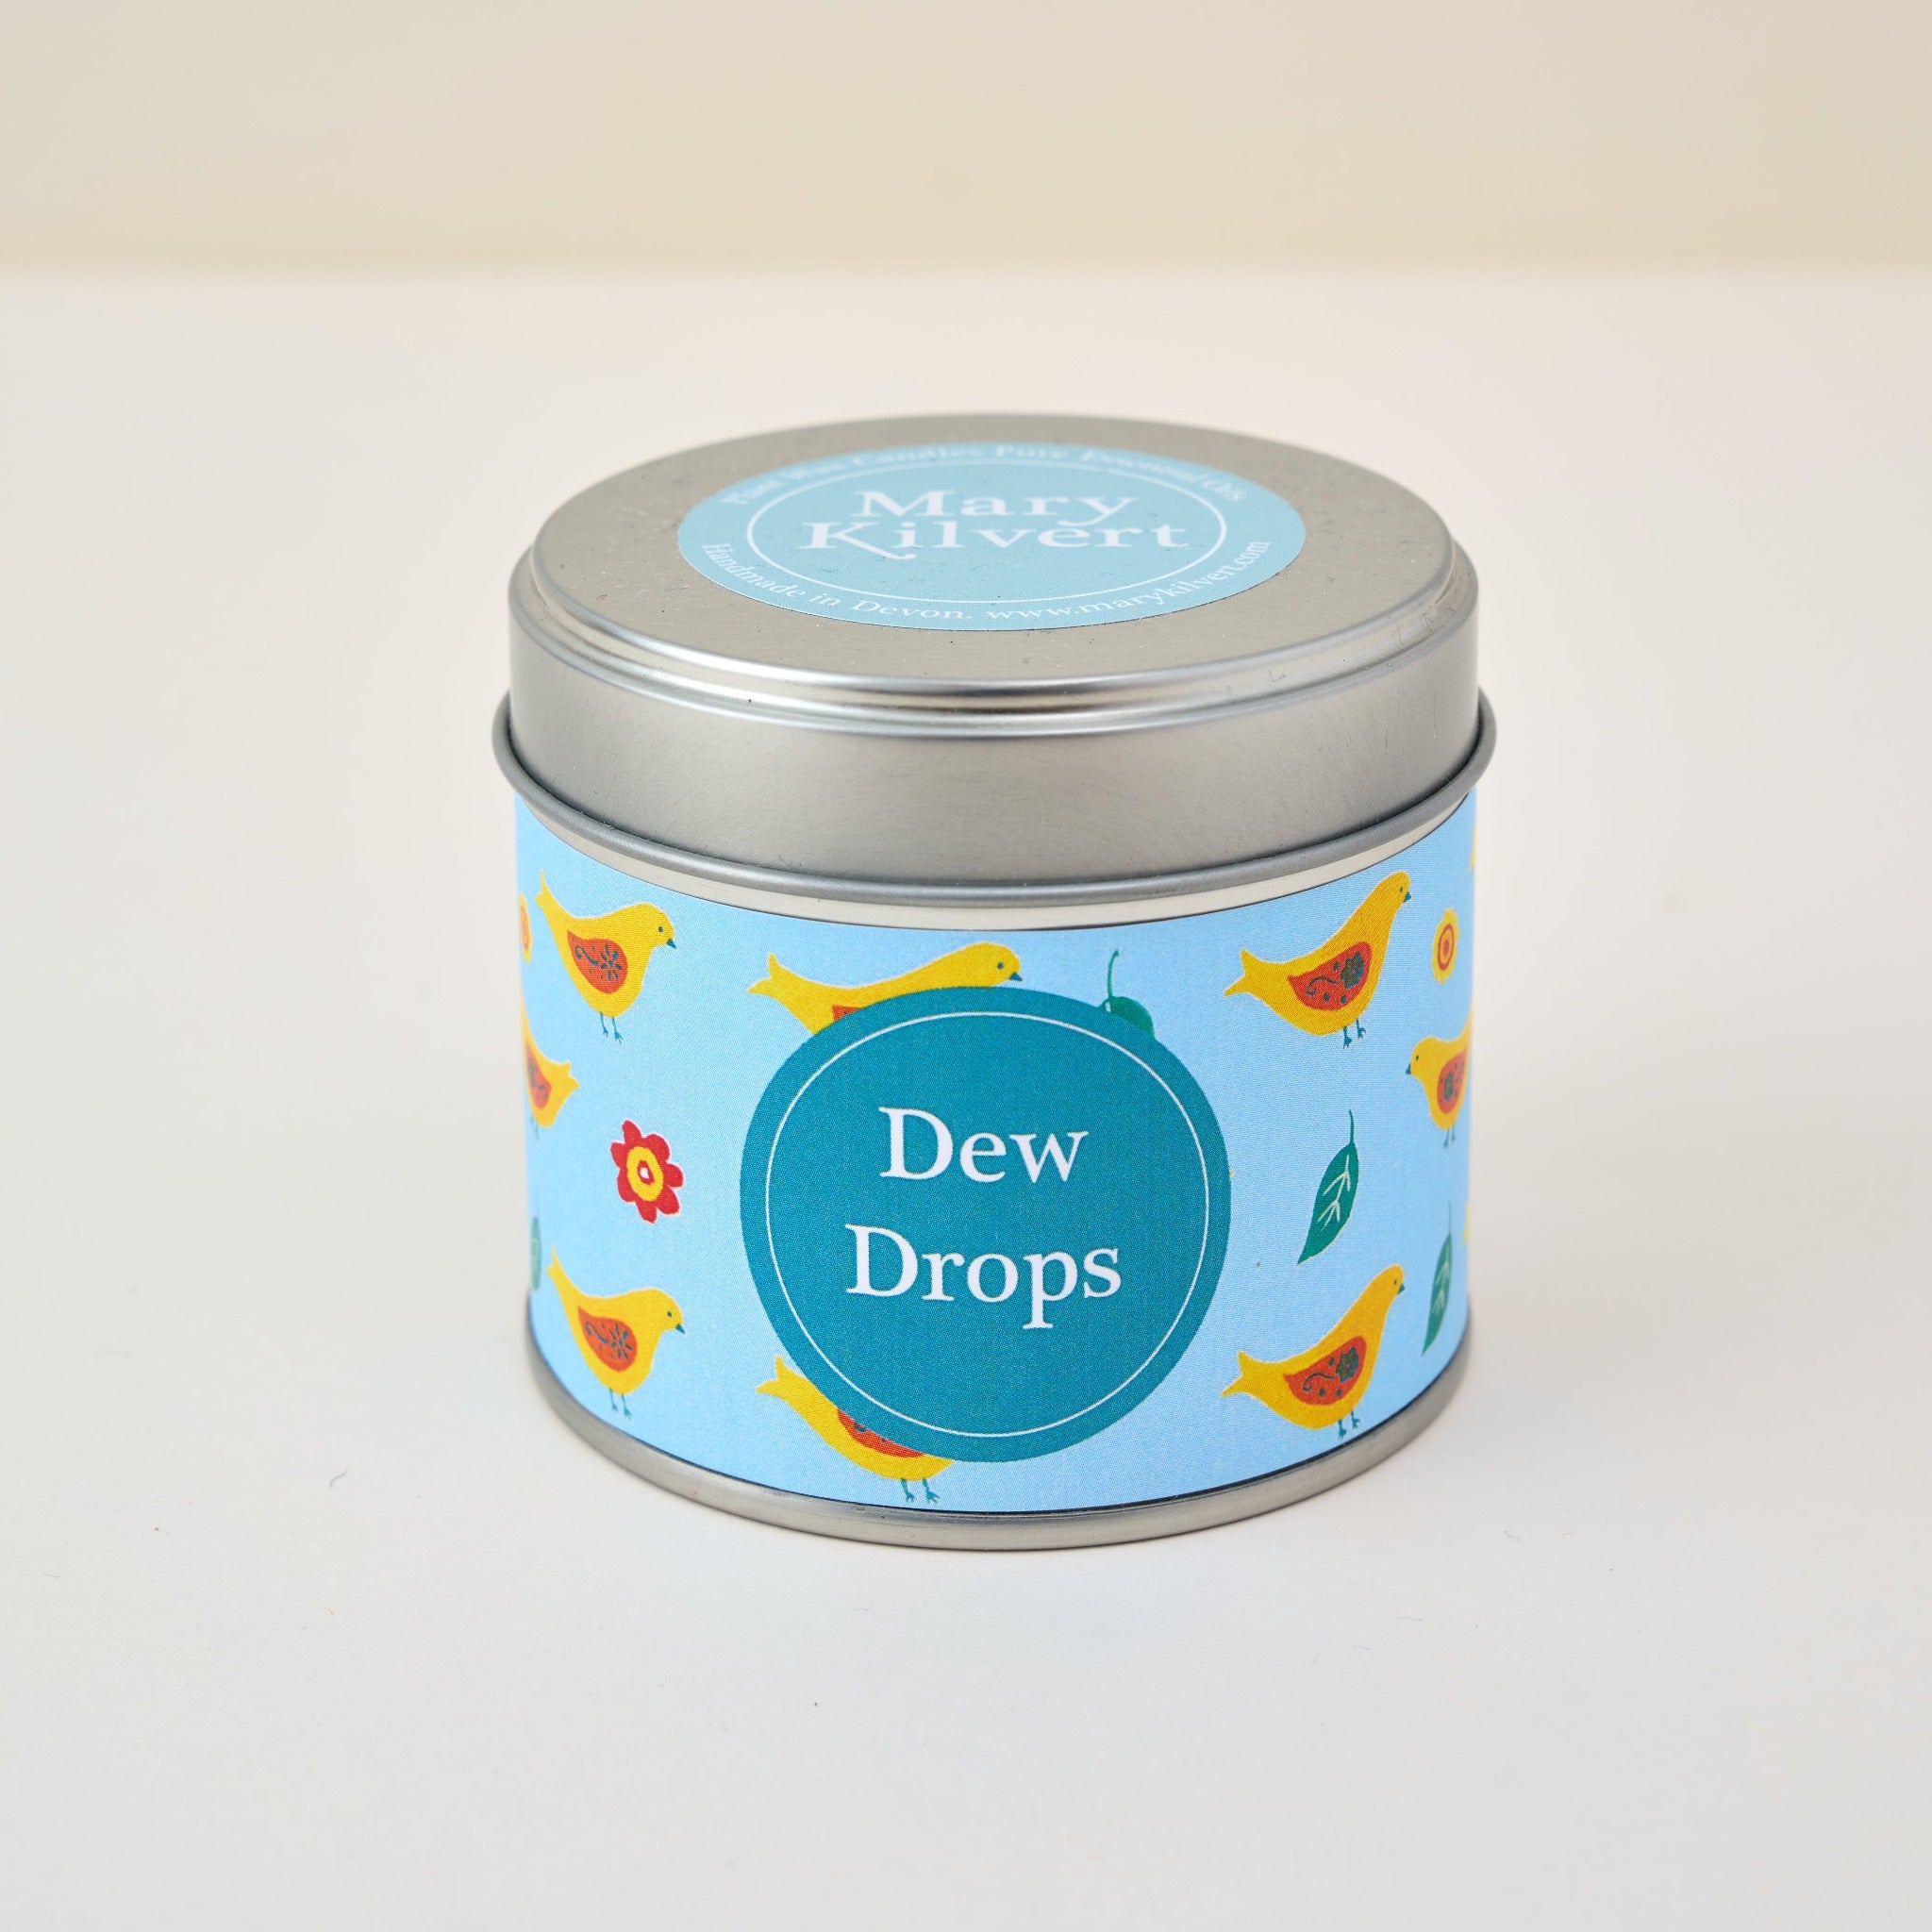 Dew Drops Candle by Mary Kilvert